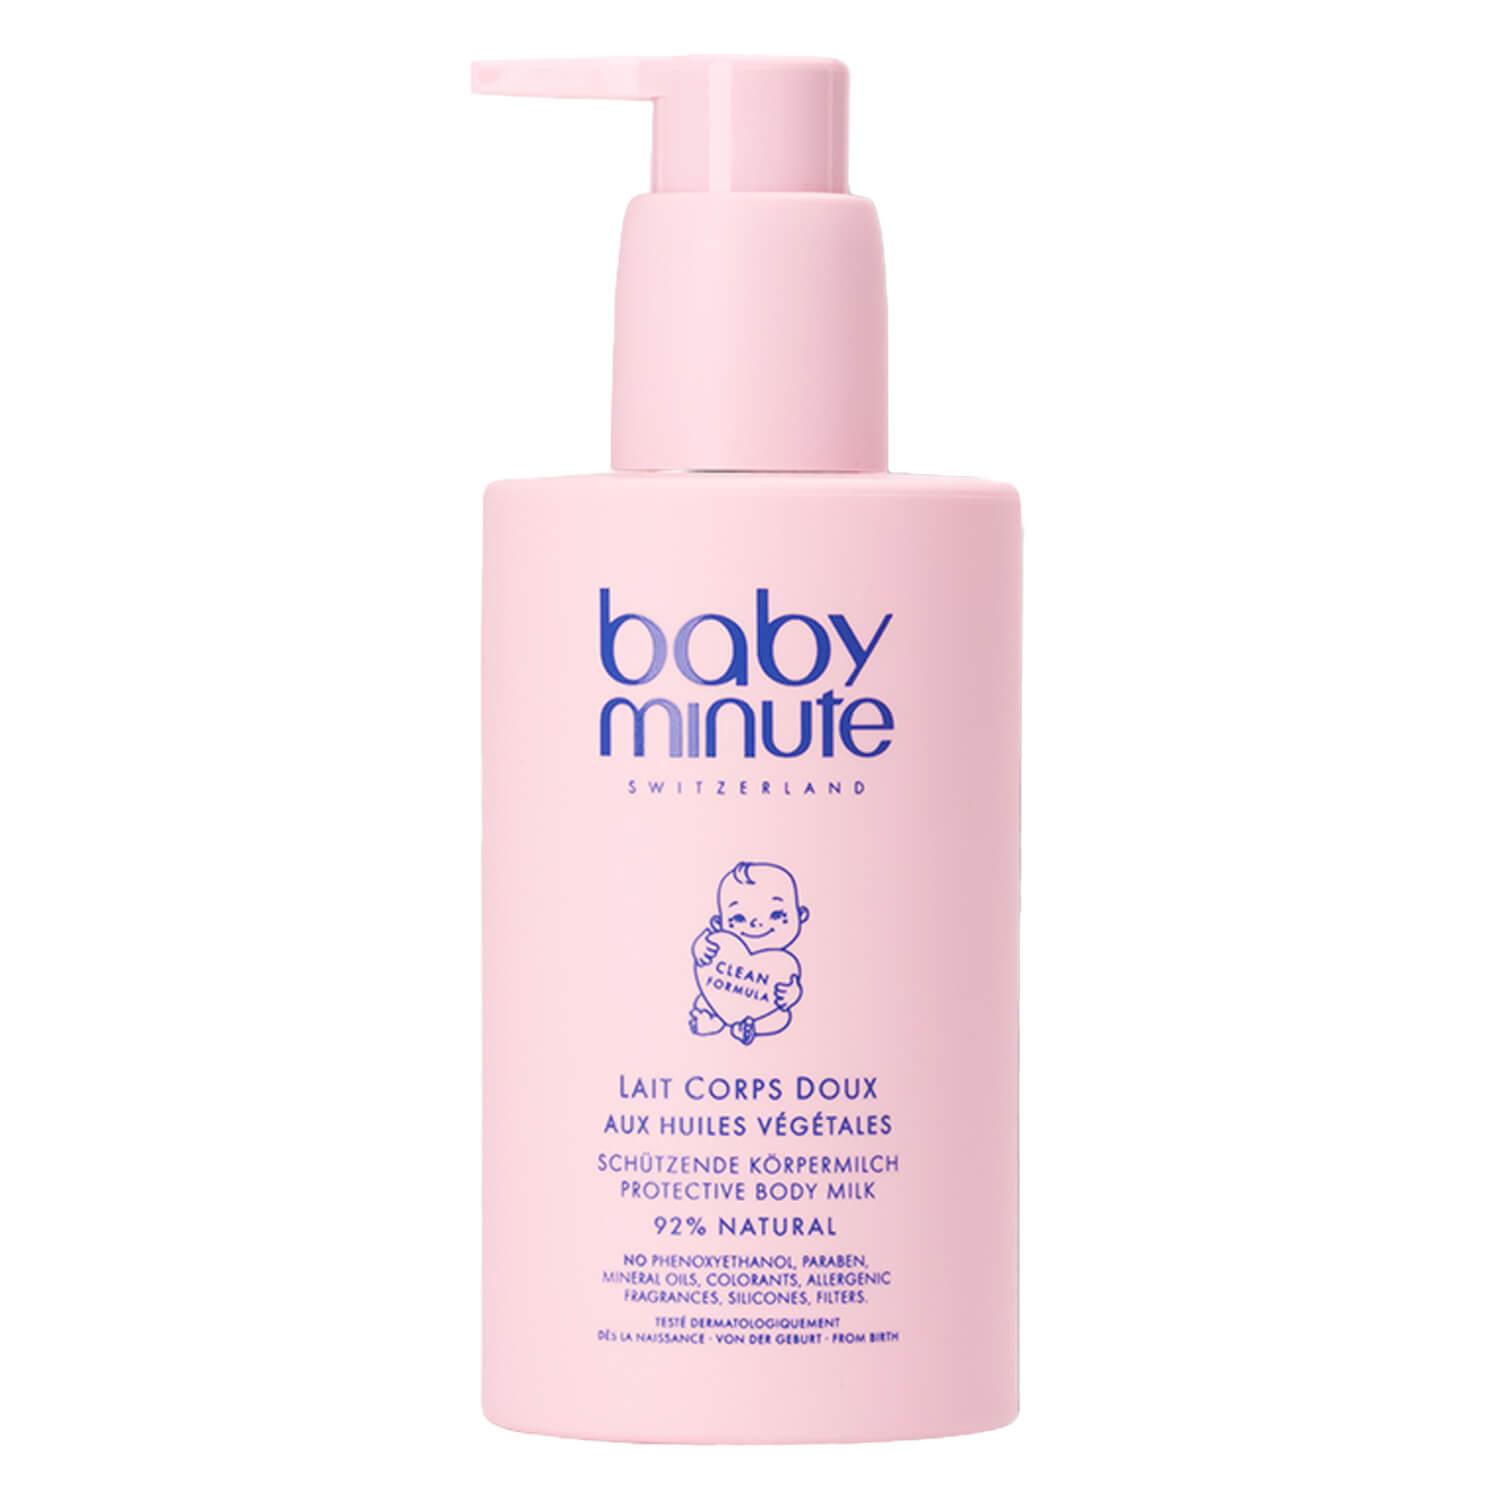 babyminute - Protective Body Milk